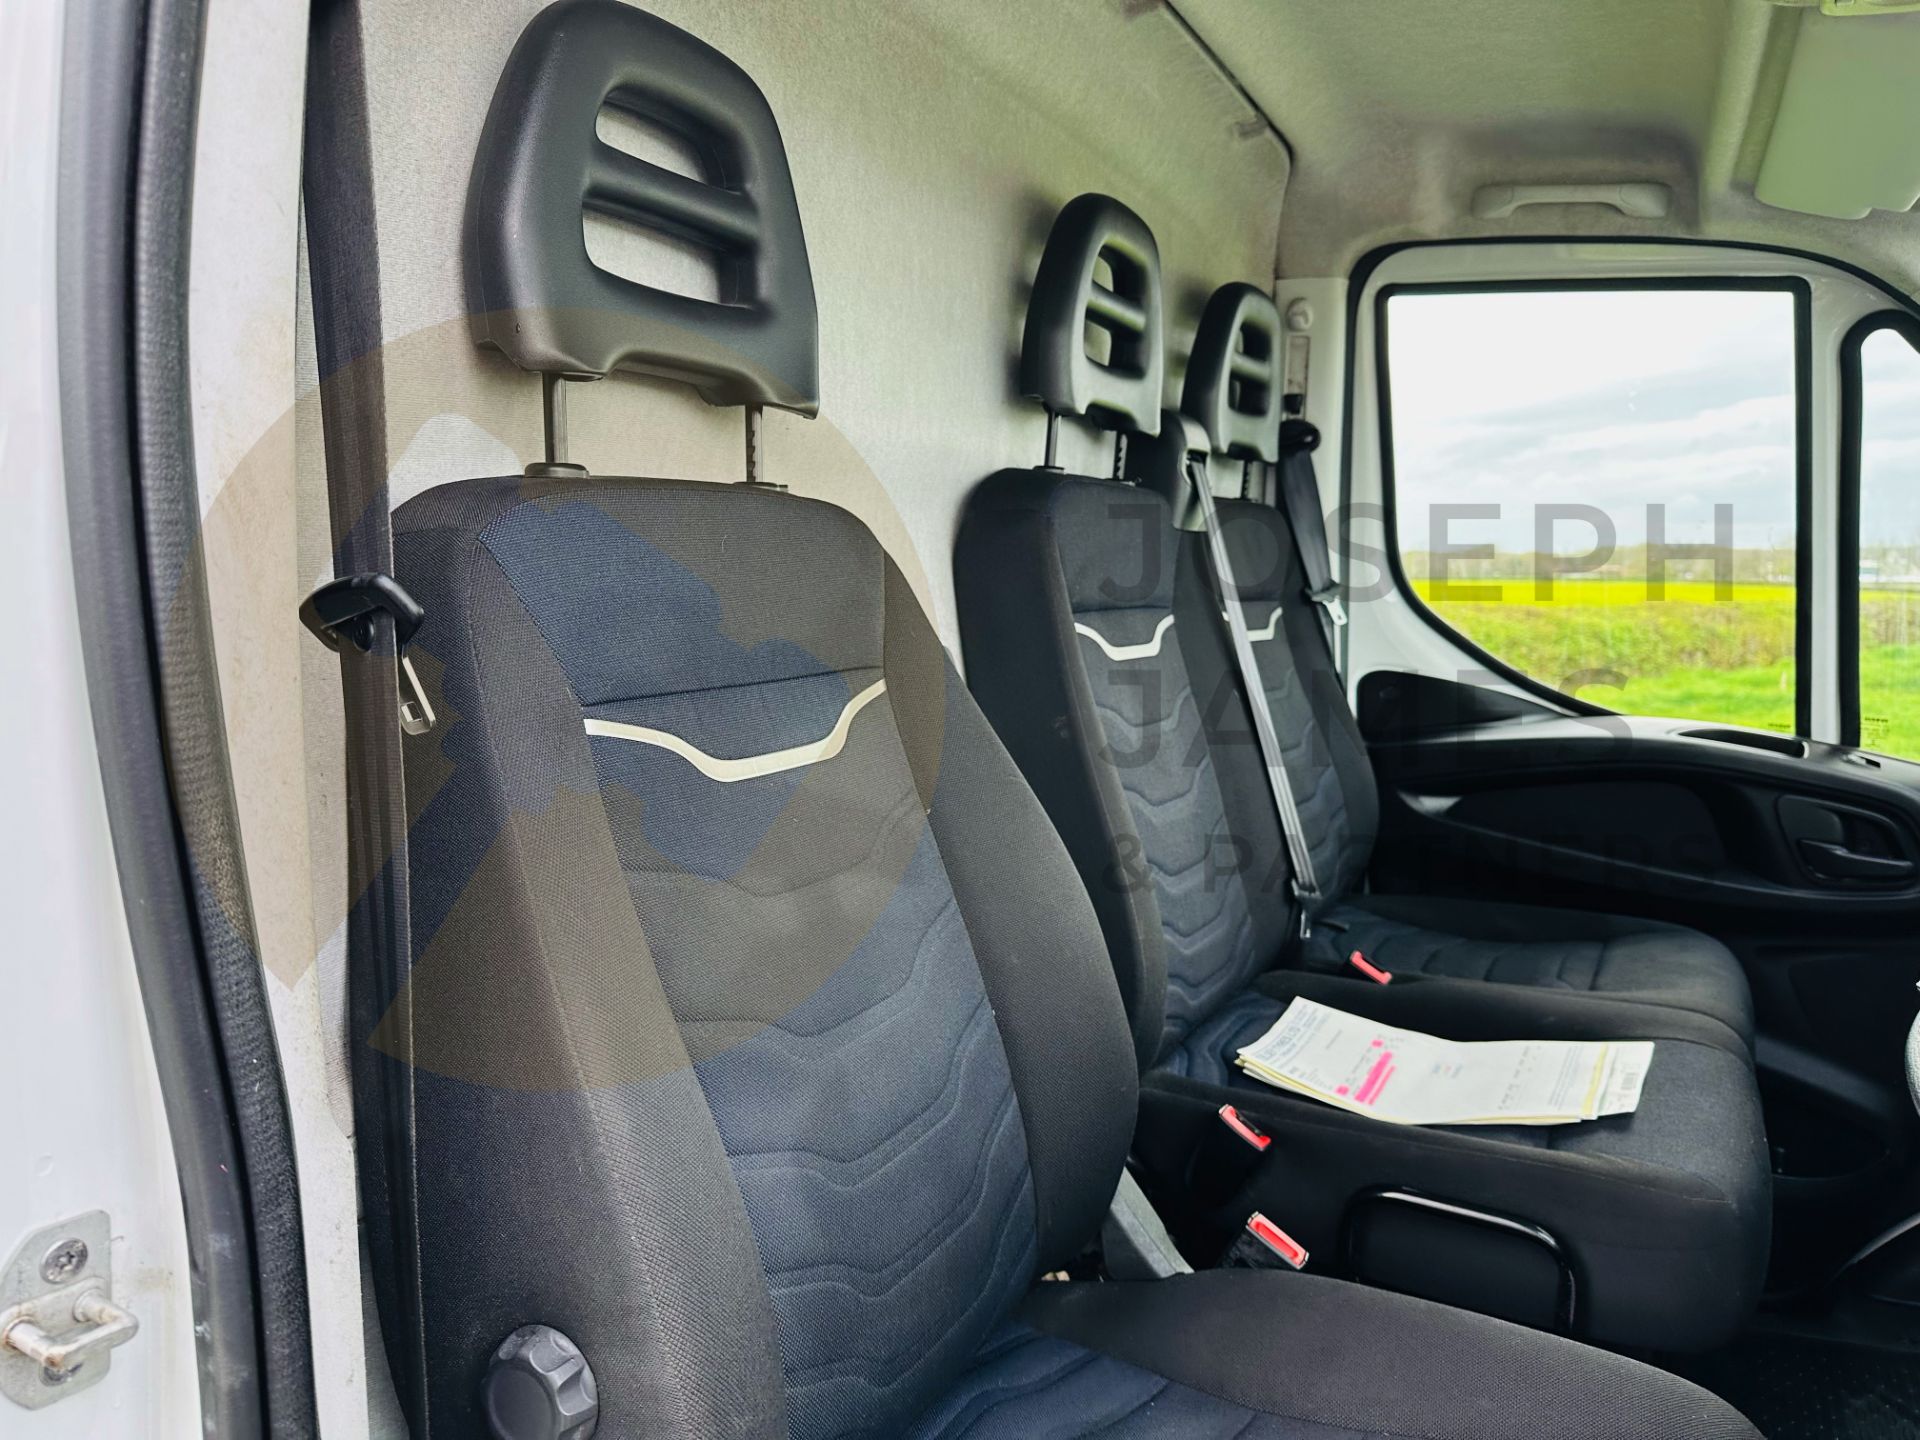 IVECO DAILY 35-140 LONG WHEEL BASE HIFG ROOF - 2021 REG (NEW SHAPE) ONLY 85K MILES - AIR CON - LOOK! - Image 21 of 30